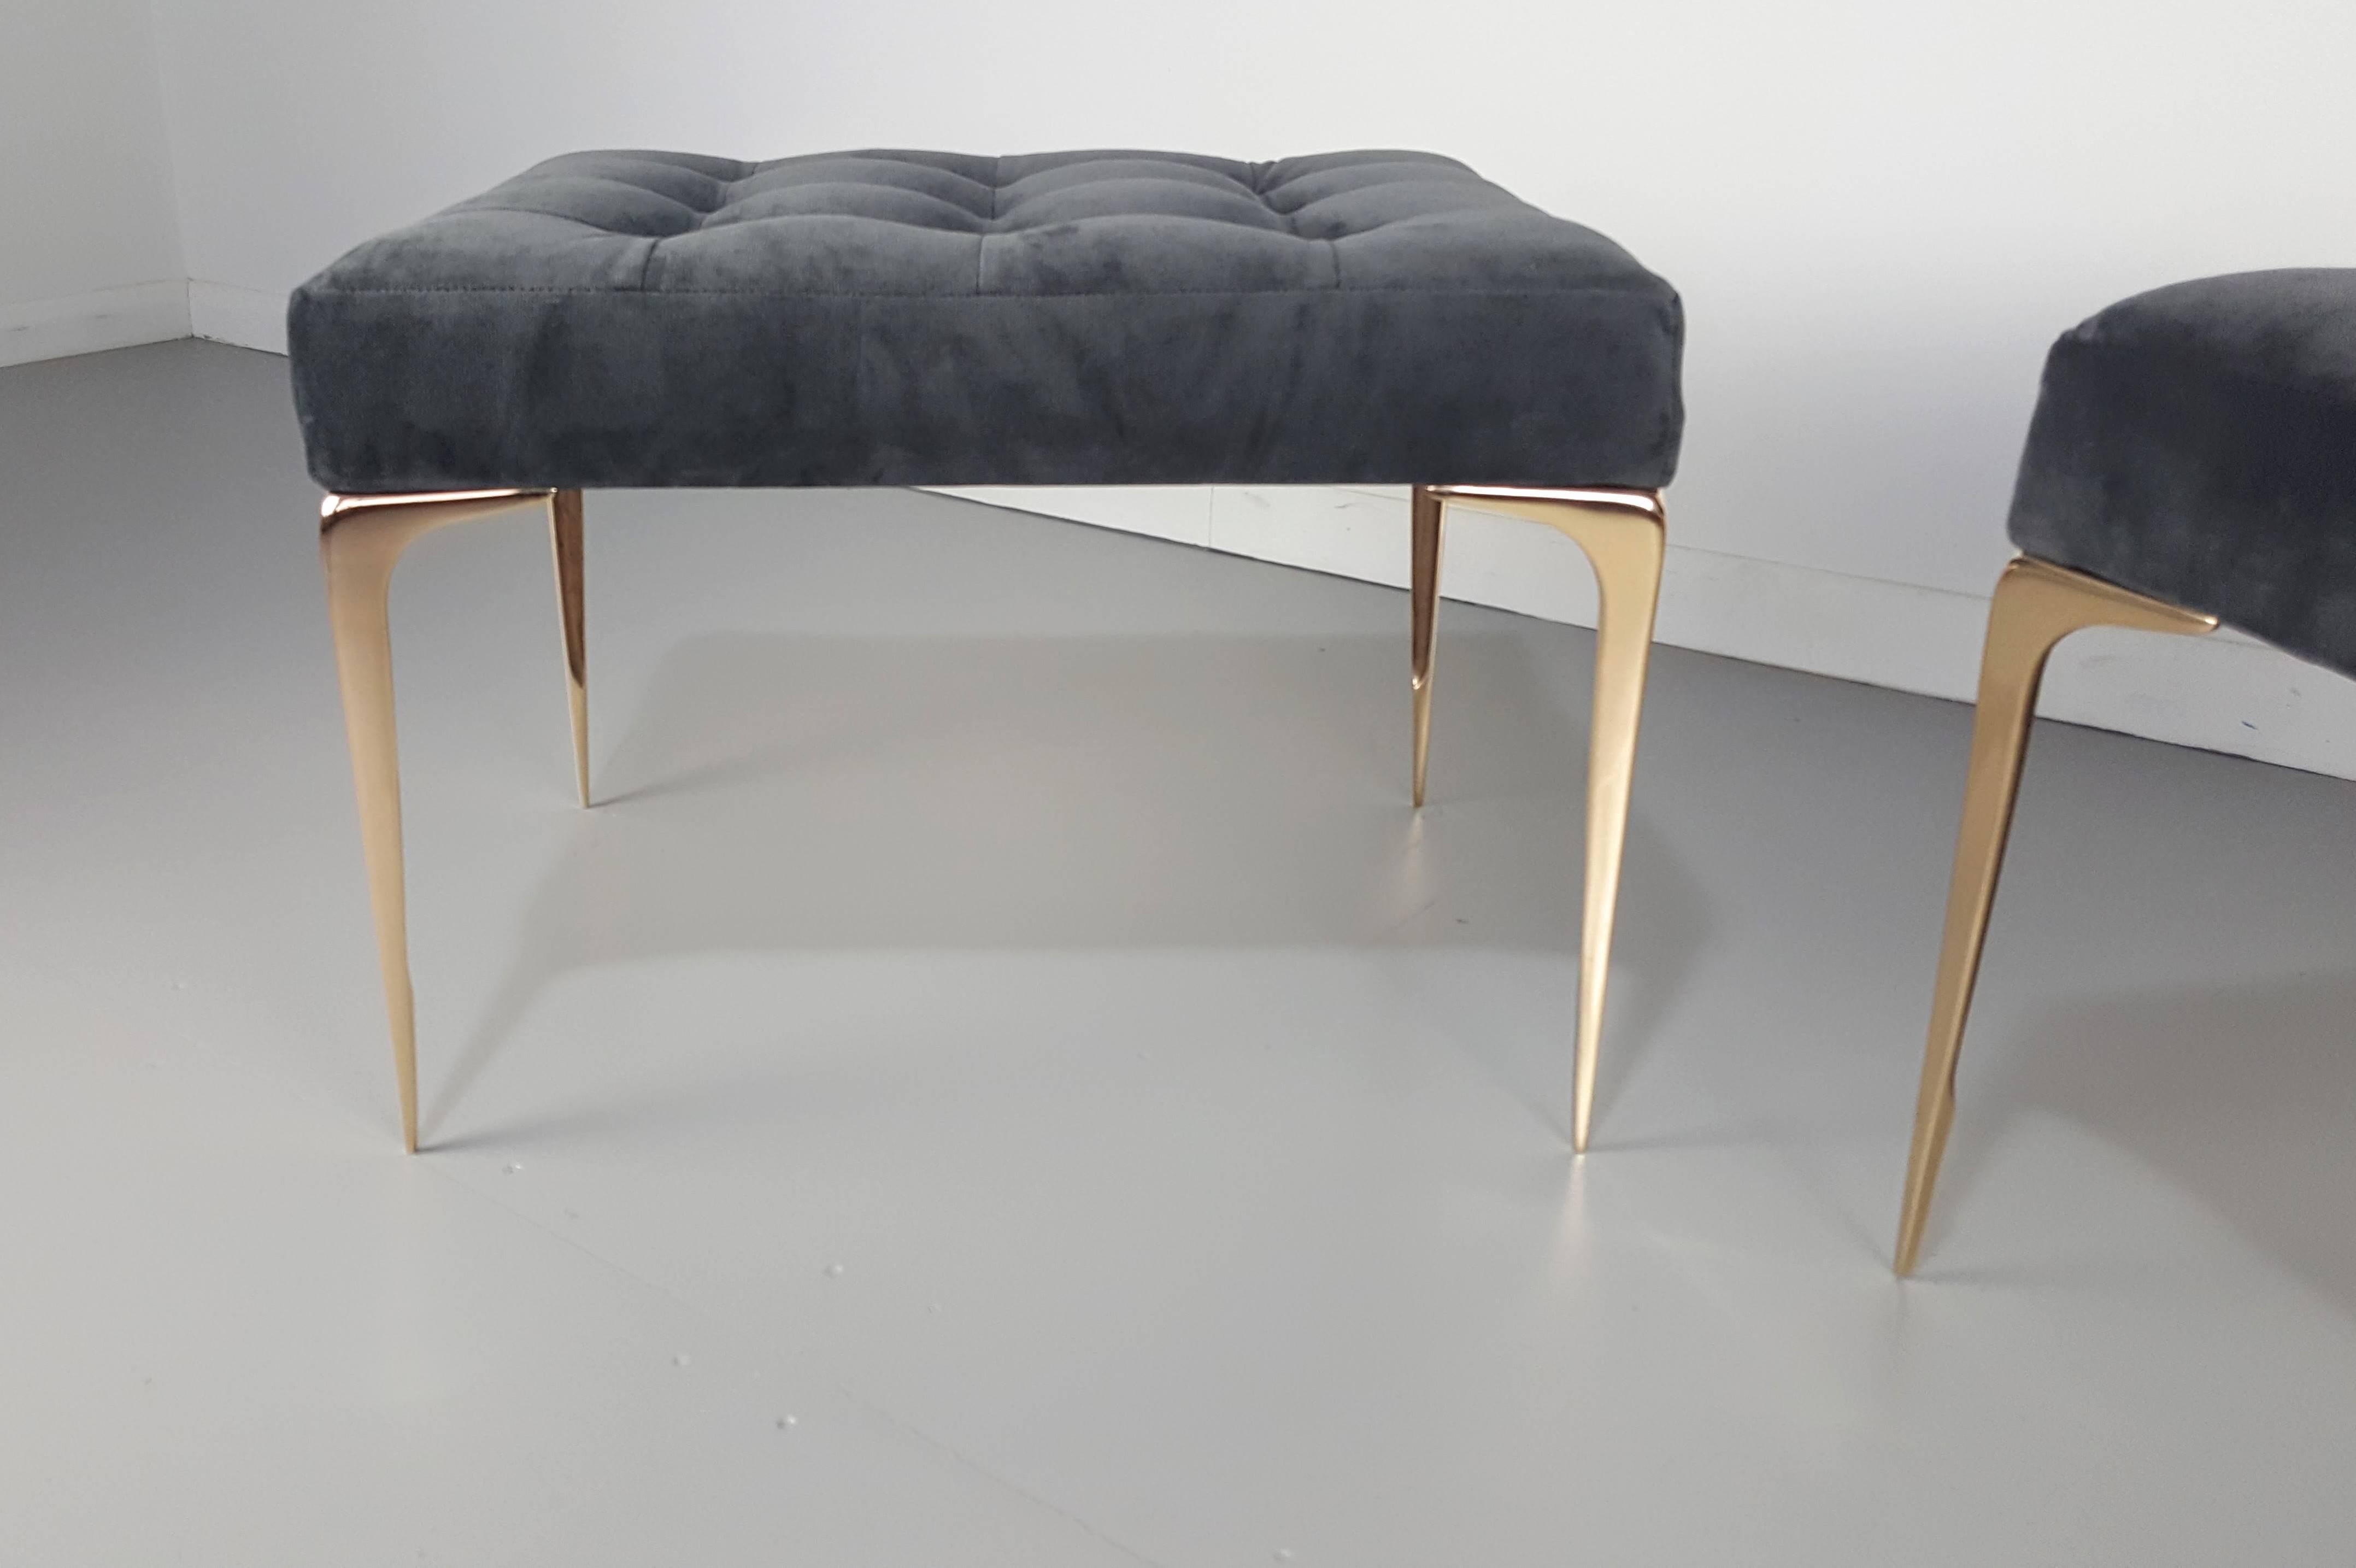 Pair of Italian modern ottomans or benches in velvet with a solid bronze tapered leg. Our Lancia bench leg is an exact preproduction of a 1950s Italian design. Originally produced in brass, our version is hand cast in solid bronze which has a